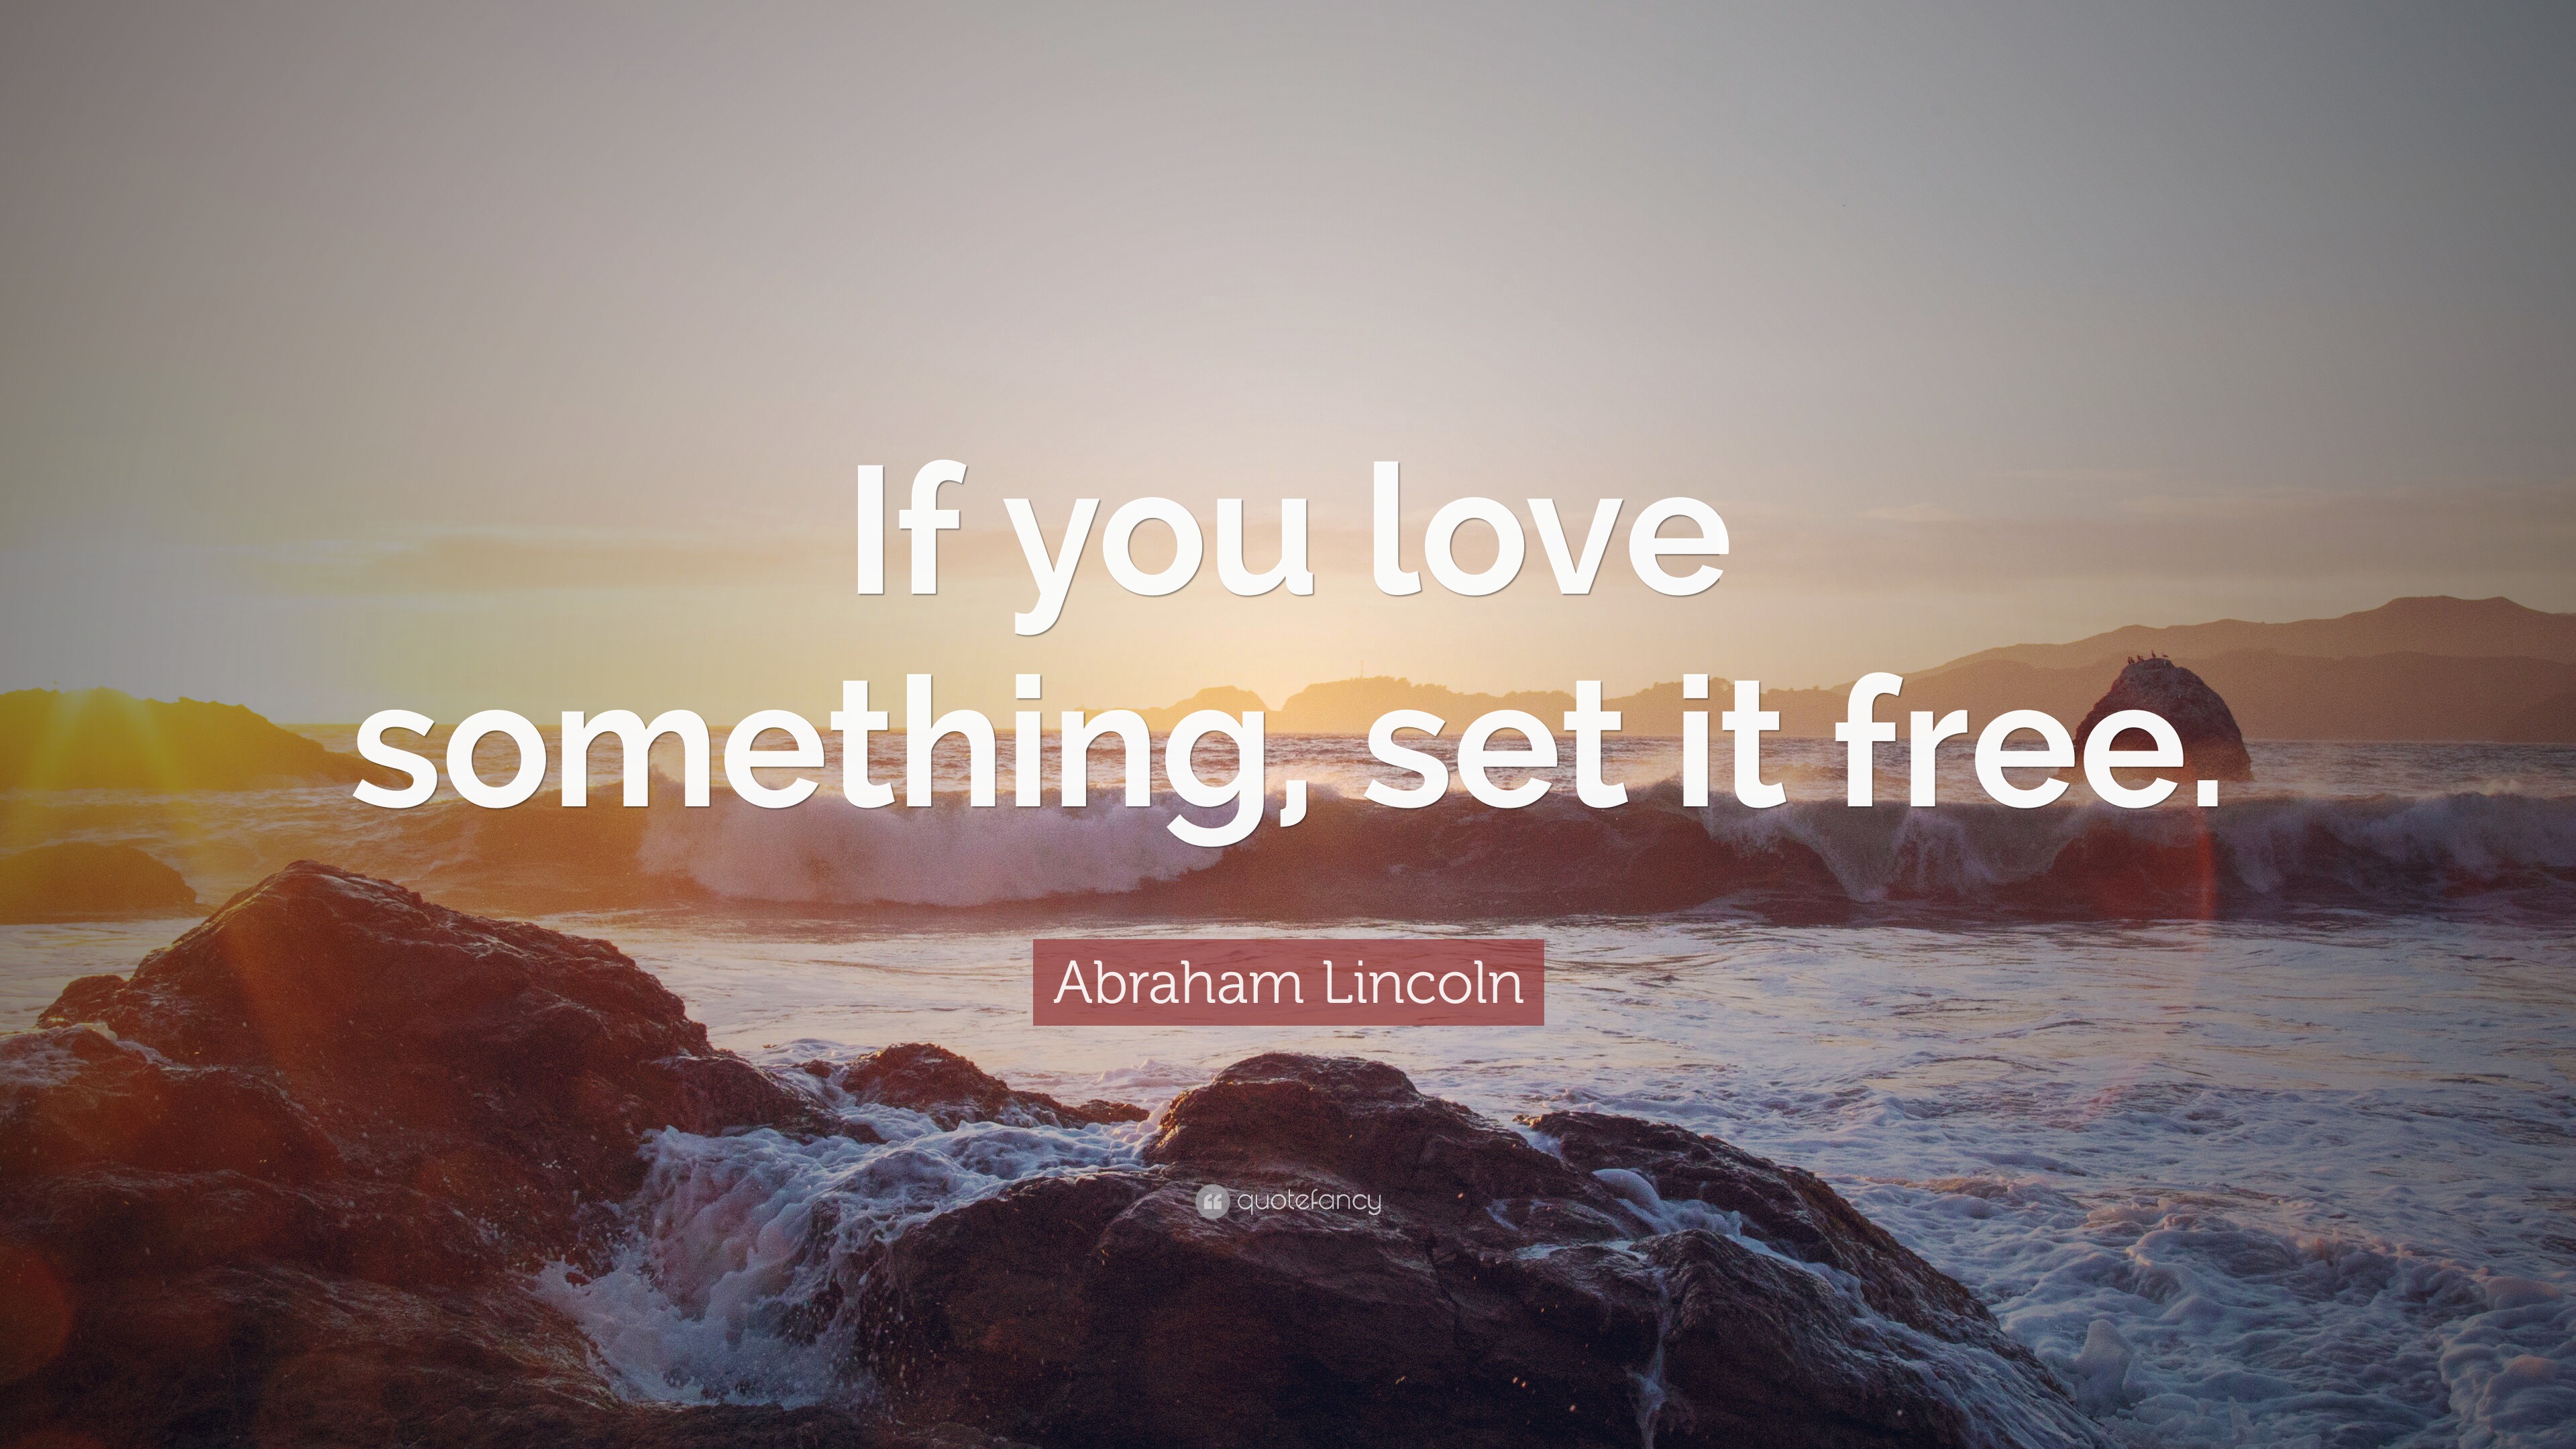 Abraham Lincoln Quote “If you love something set it free ”